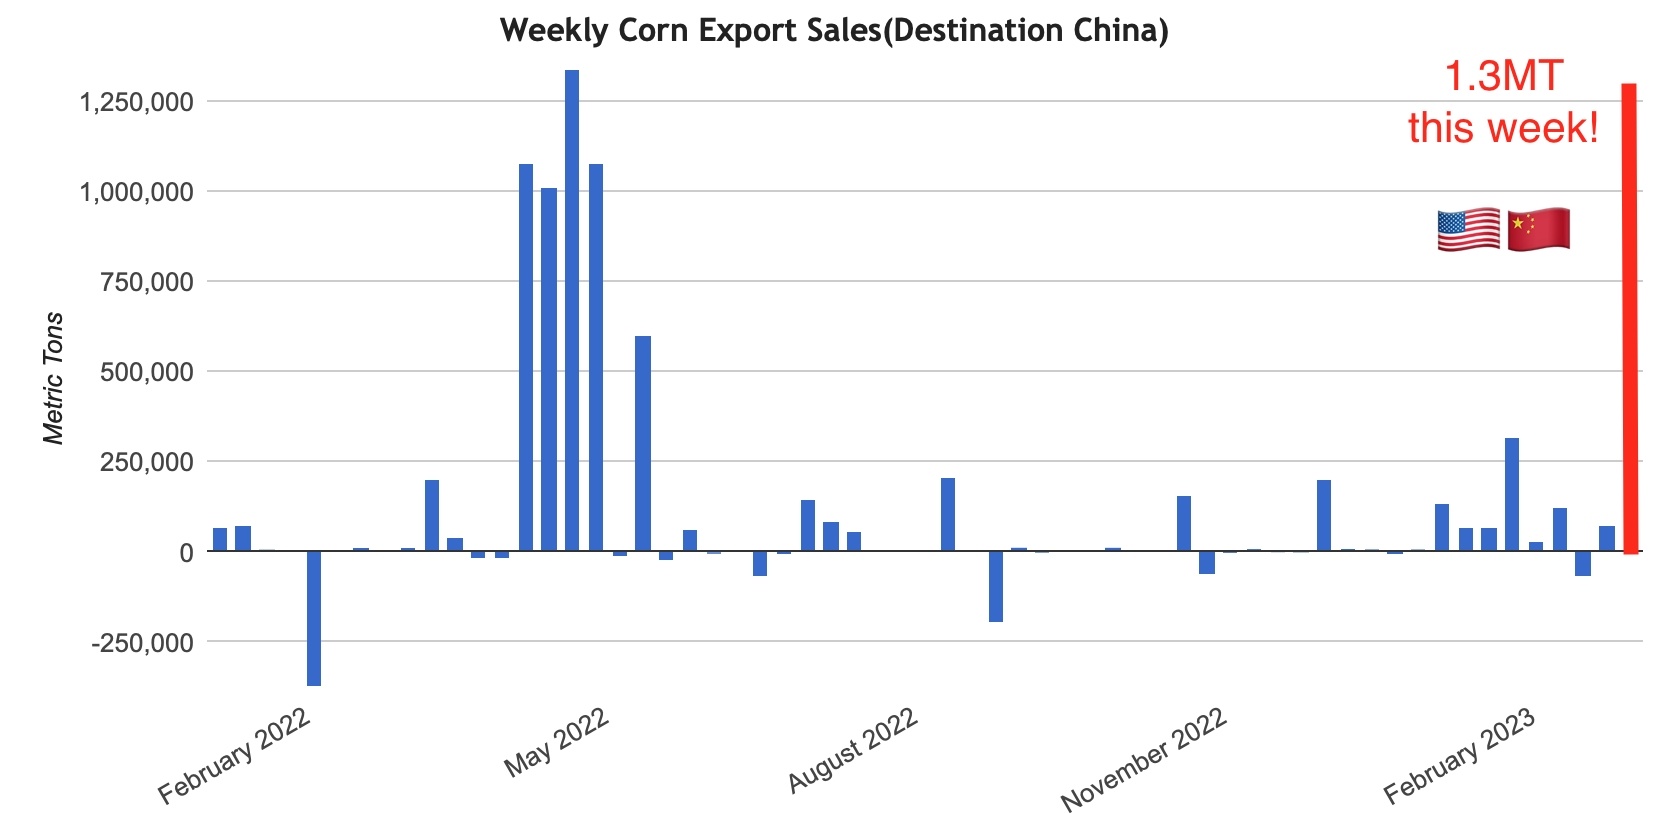 China 🇨🇳 “finally” made two impressive purchases of US 🇺🇸 corn this week!